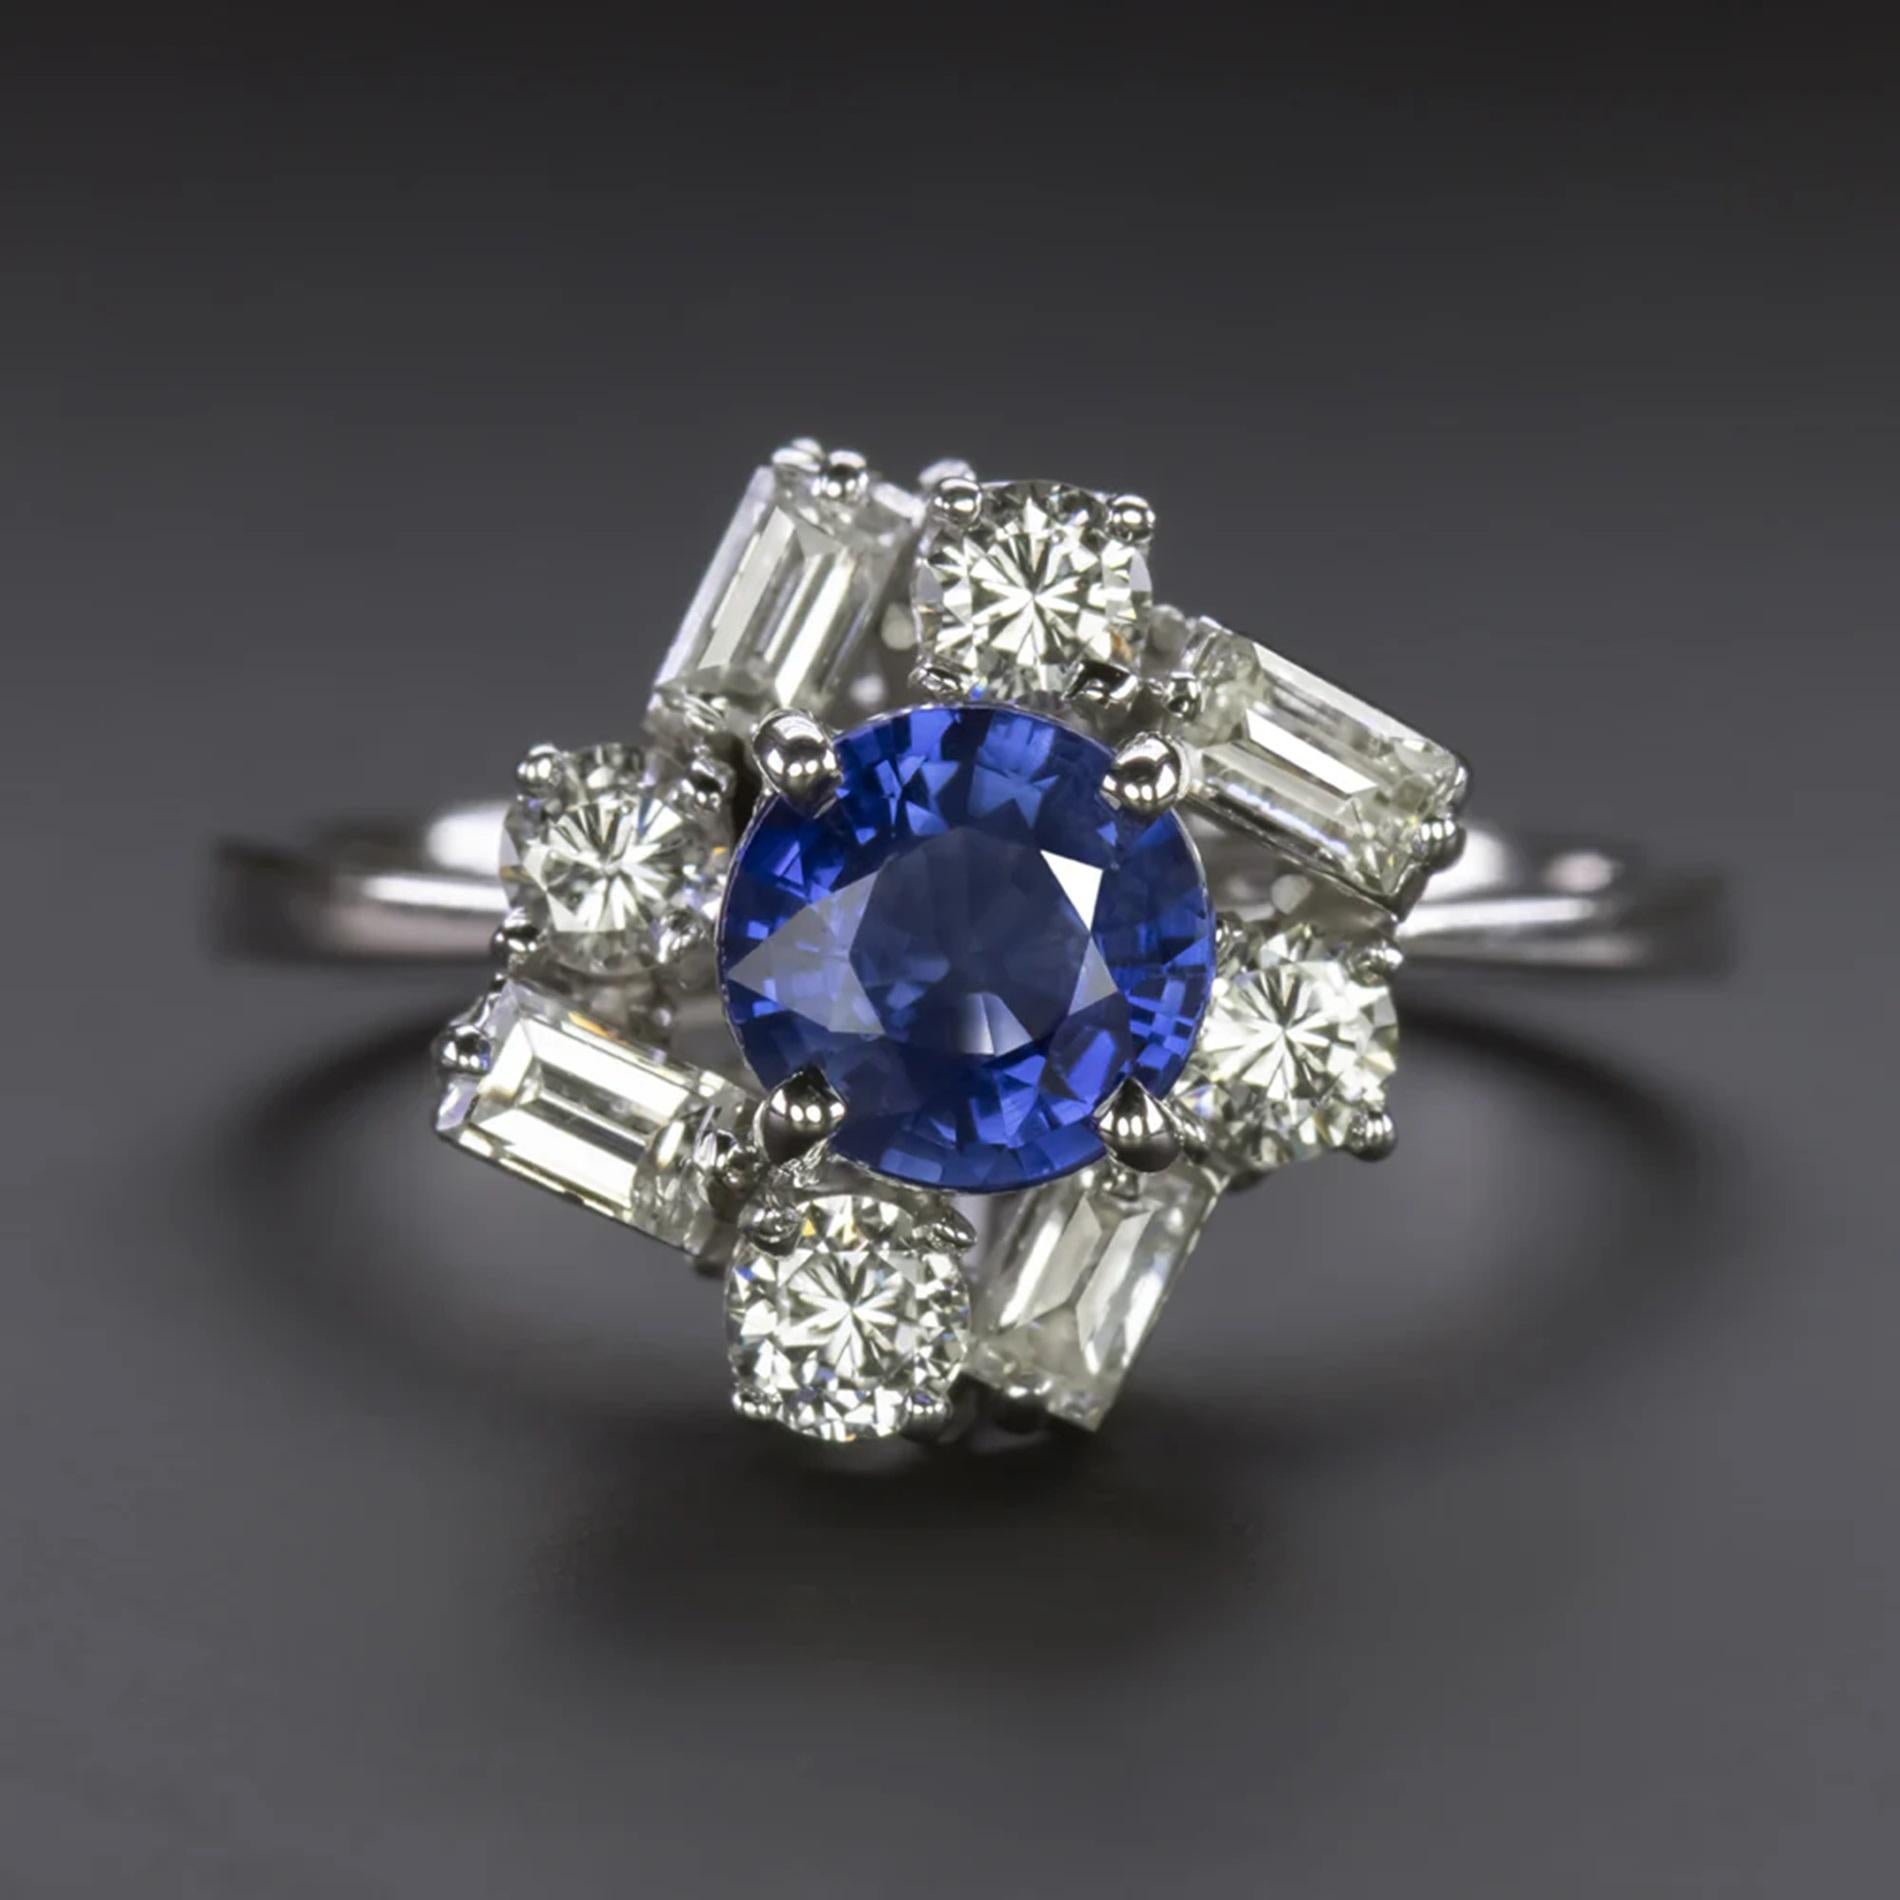 Presenting an exquisite cocktail ring showcasing a luxurious blue sapphire encircled by a distinctive tiered halo of round and baguette-cut diamonds.

Highlighted features include:

A captivating 0.88 carat natural sapphire center boasting a deeply